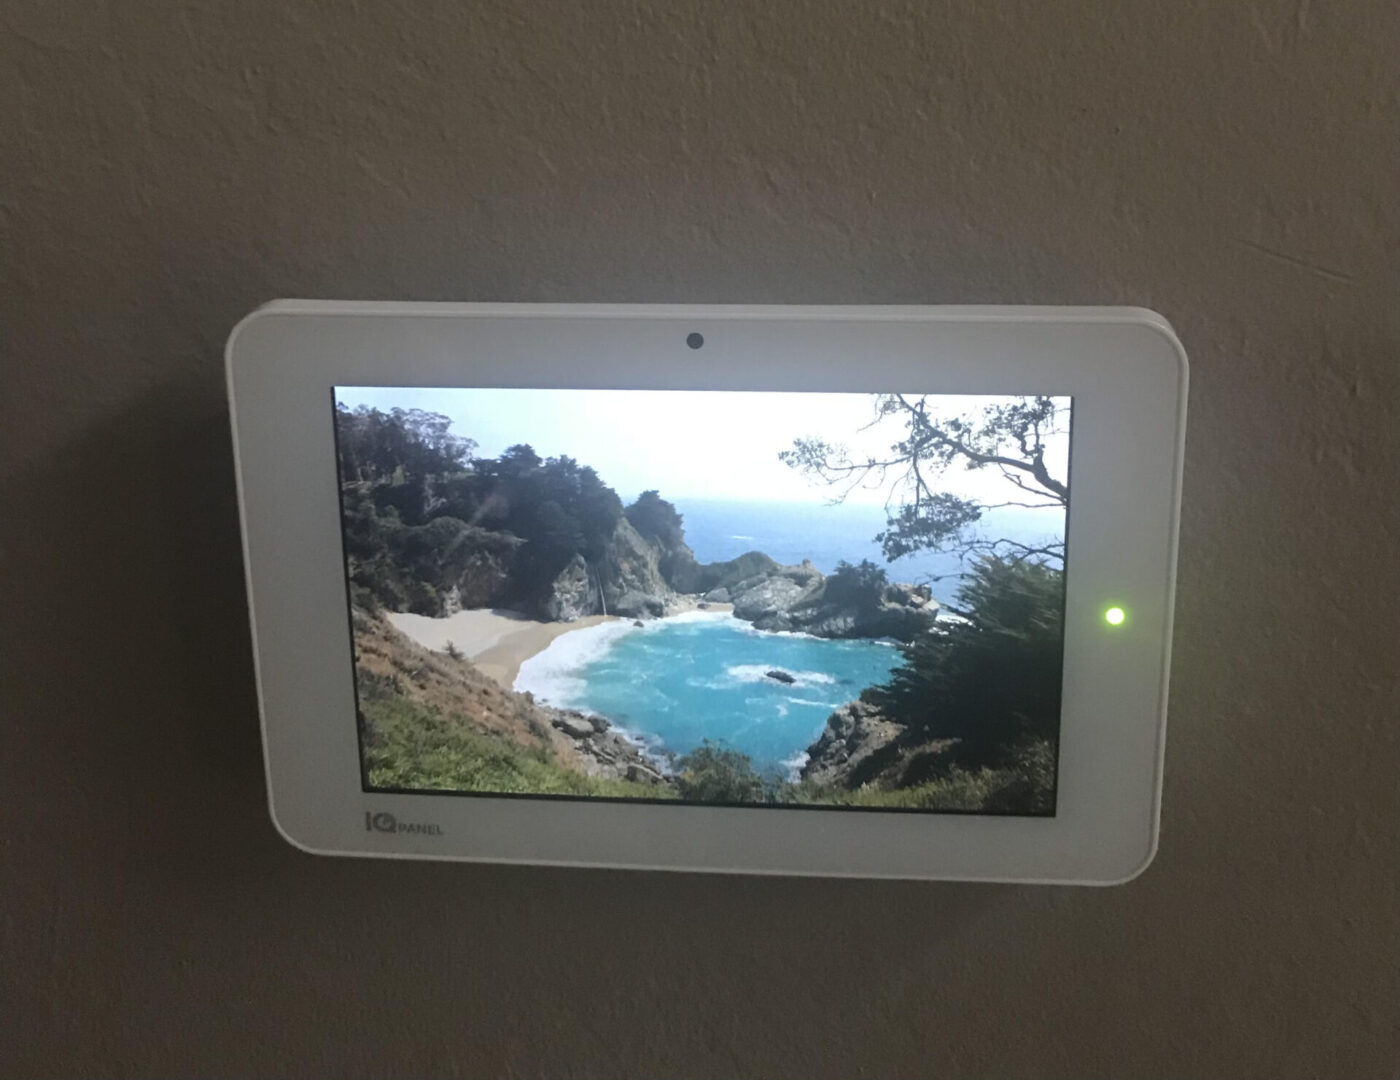 A white tablet mounted on the wall with a green light.